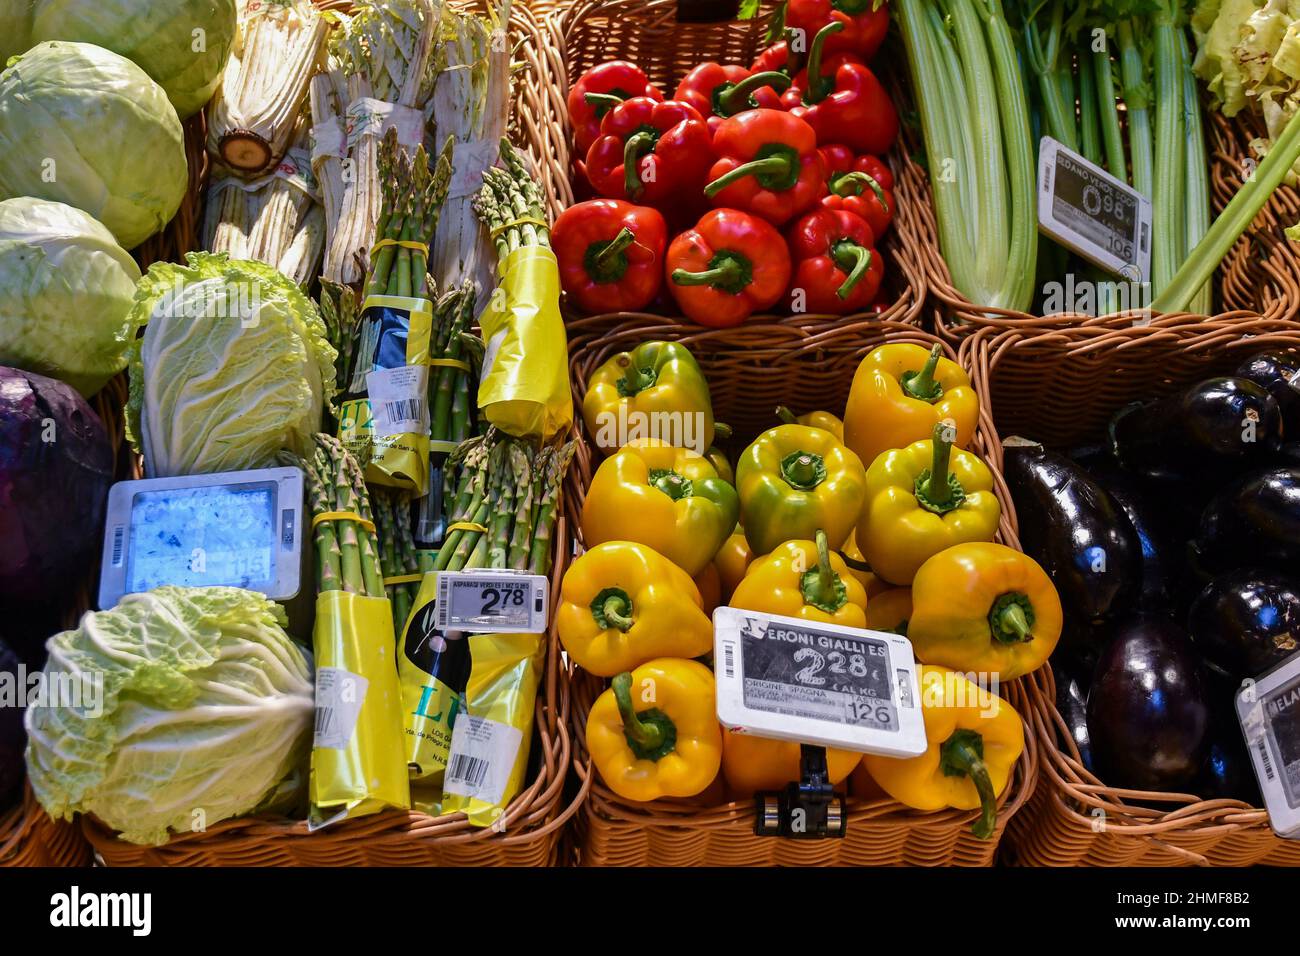 Close-up of vegetables exposed in wicker baskets (peppers, asparagus, cabbage, eggplant, celery) in the Fiorfood Coop store, Turin, Piedmont, Italy Stock Photo